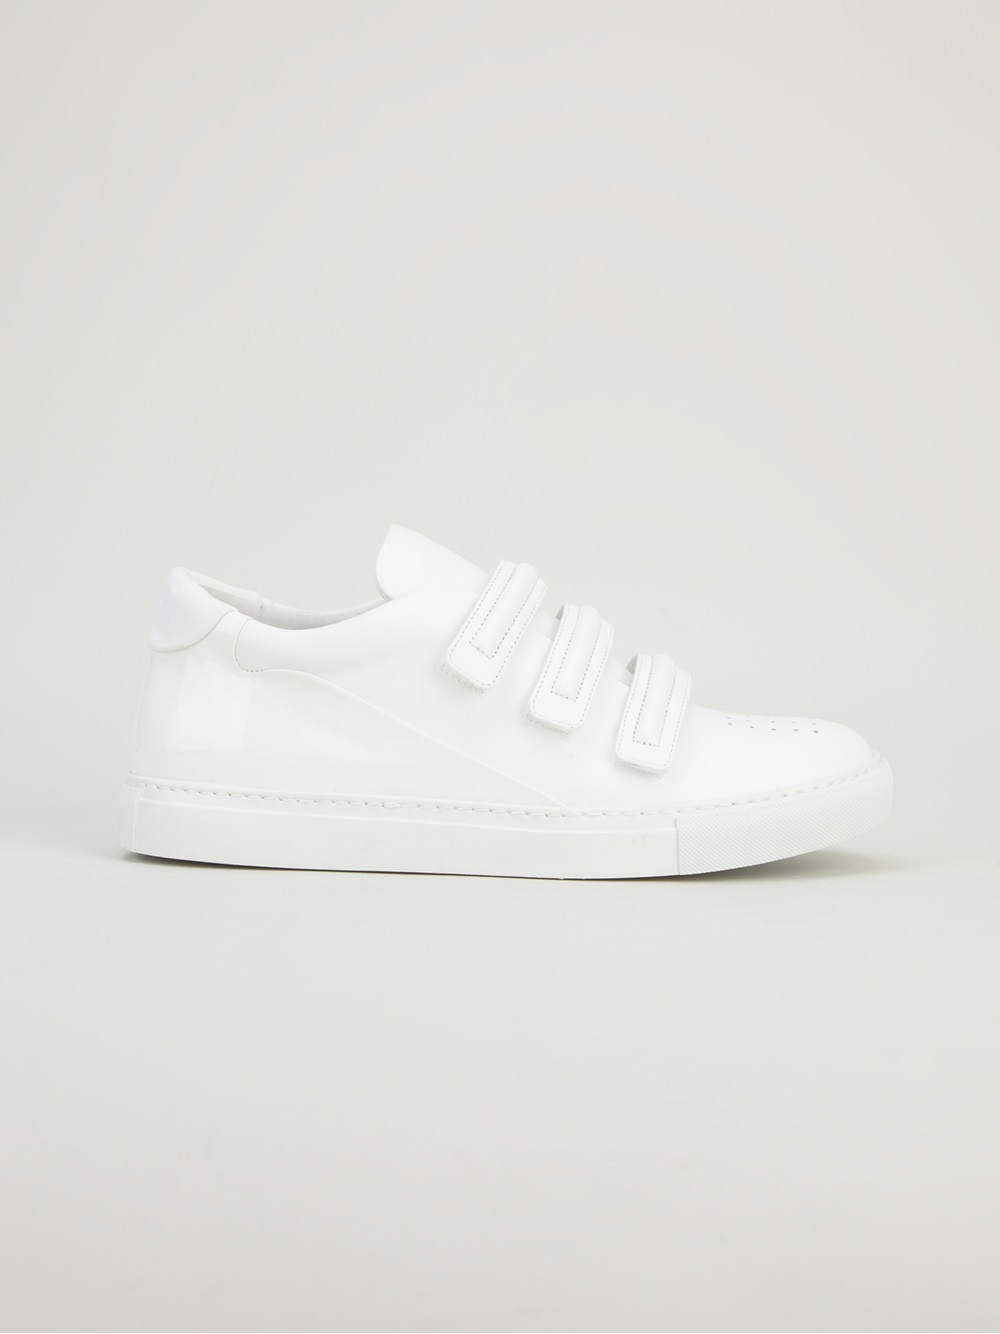 Lyst - Givenchy Velcro Sneakers in White for Men